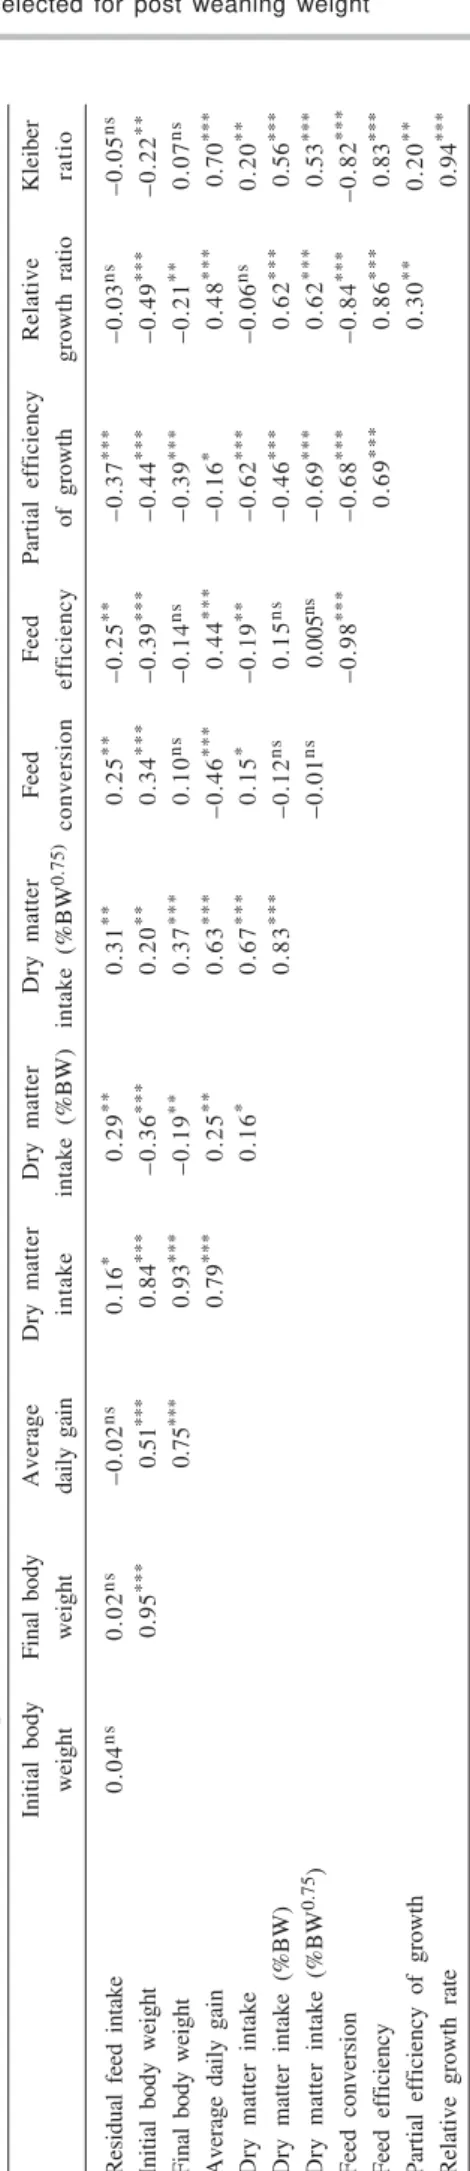 Table 6 - Pearson correlations between performance traits and efficiency measures for Nellore cattle